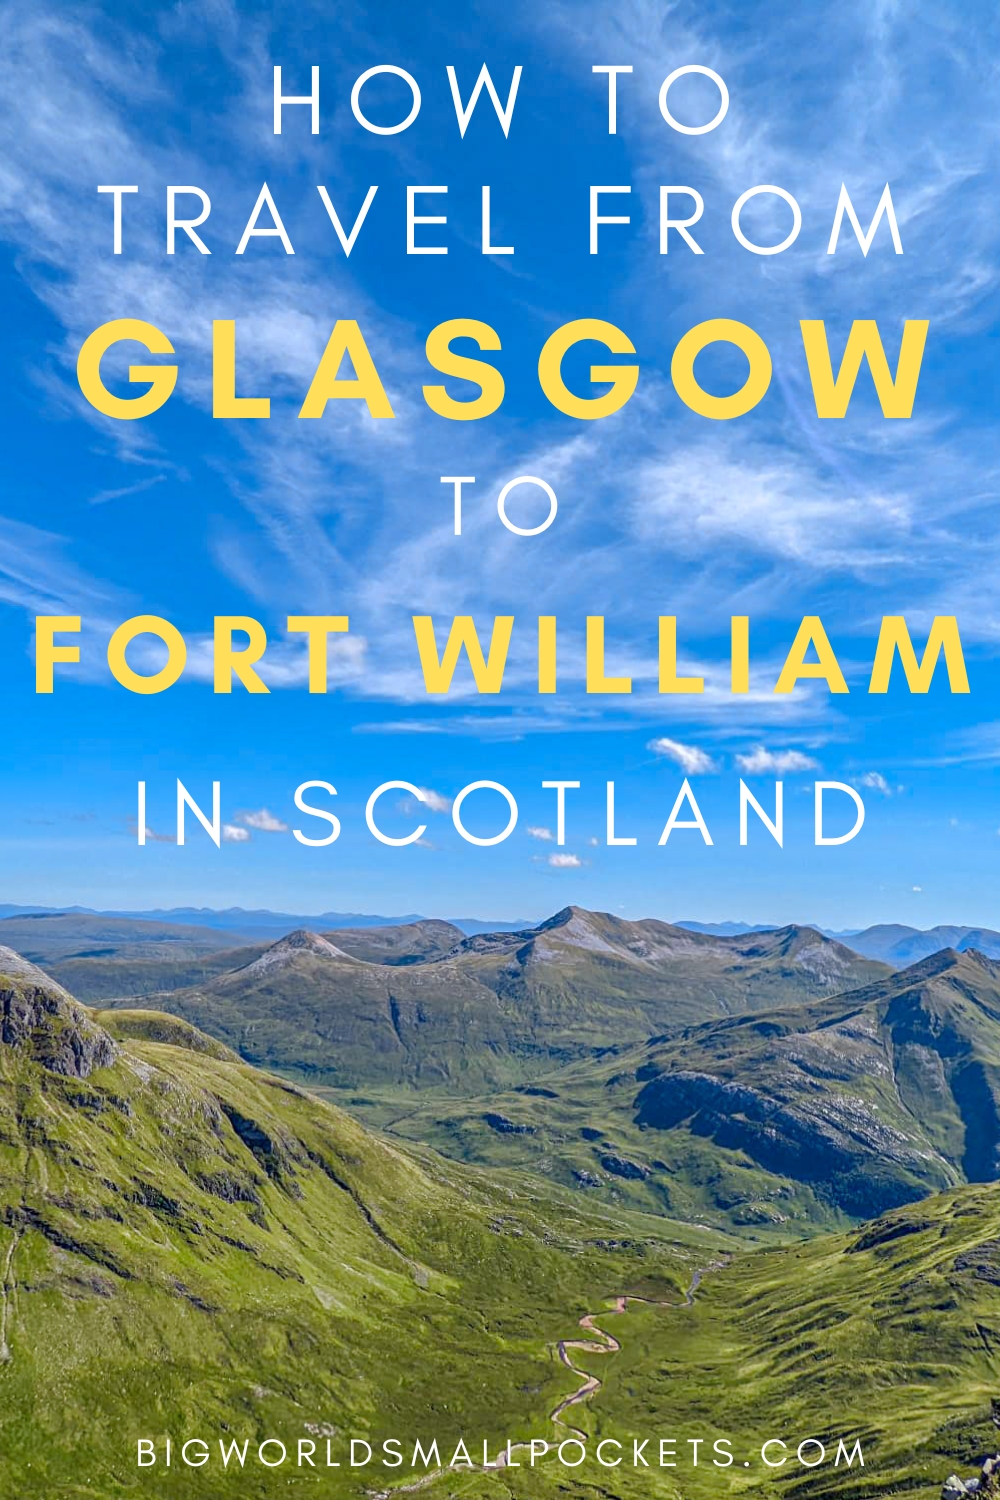 How to Travel from Glasgow to Fort William in Scotland